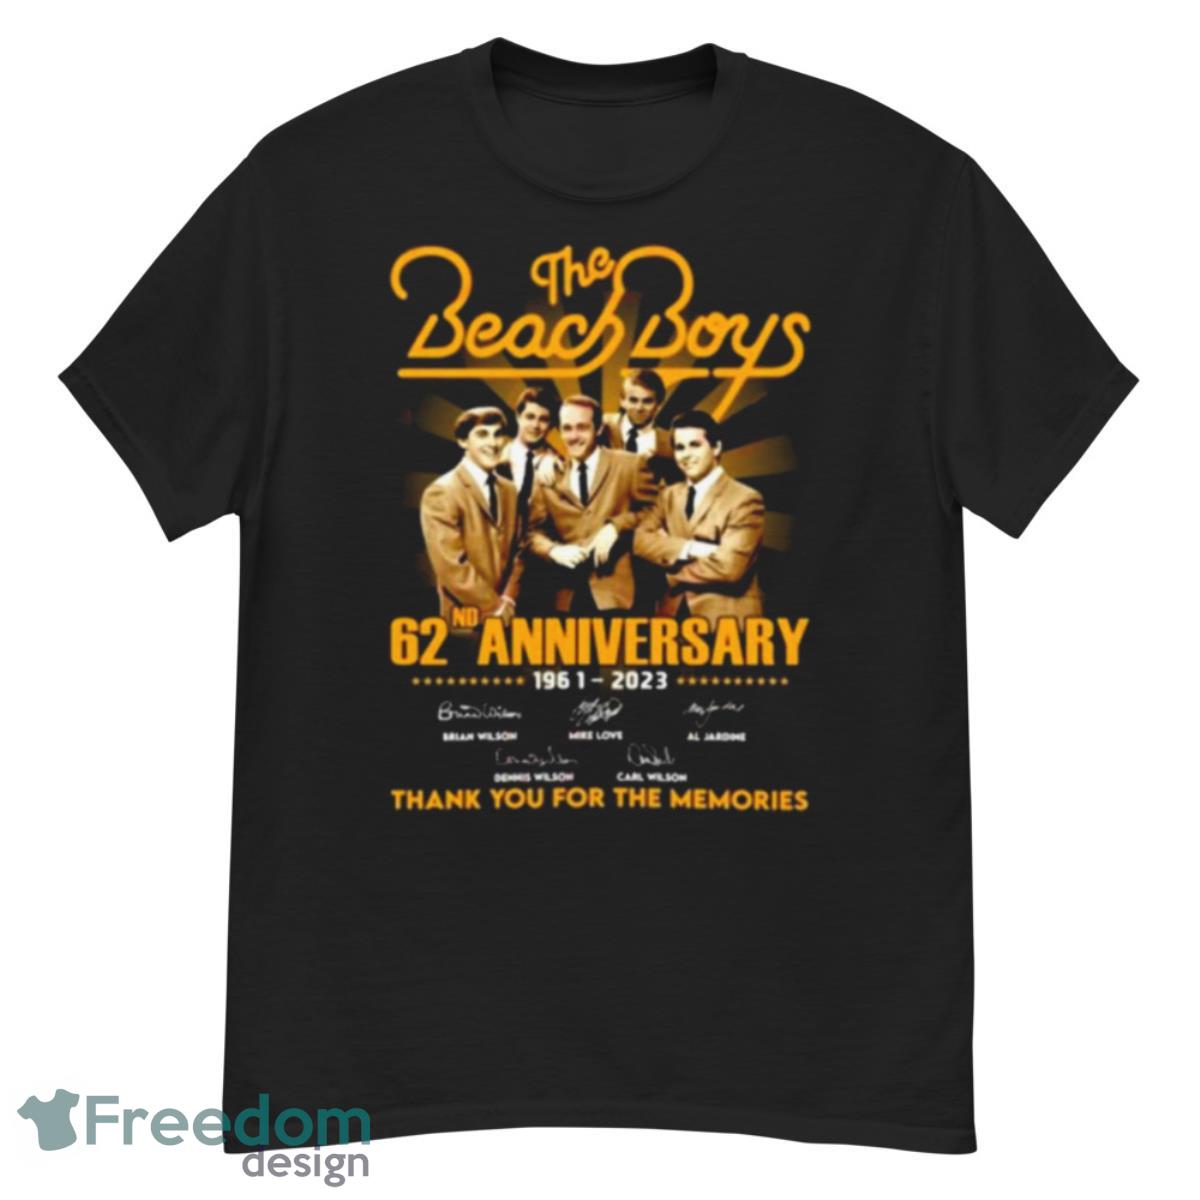 The Beach Boys 62nd Anniversary 1961 – 2023 Thank You For The Memories Signatures Shirt - G500 Men’s Classic T-Shirt